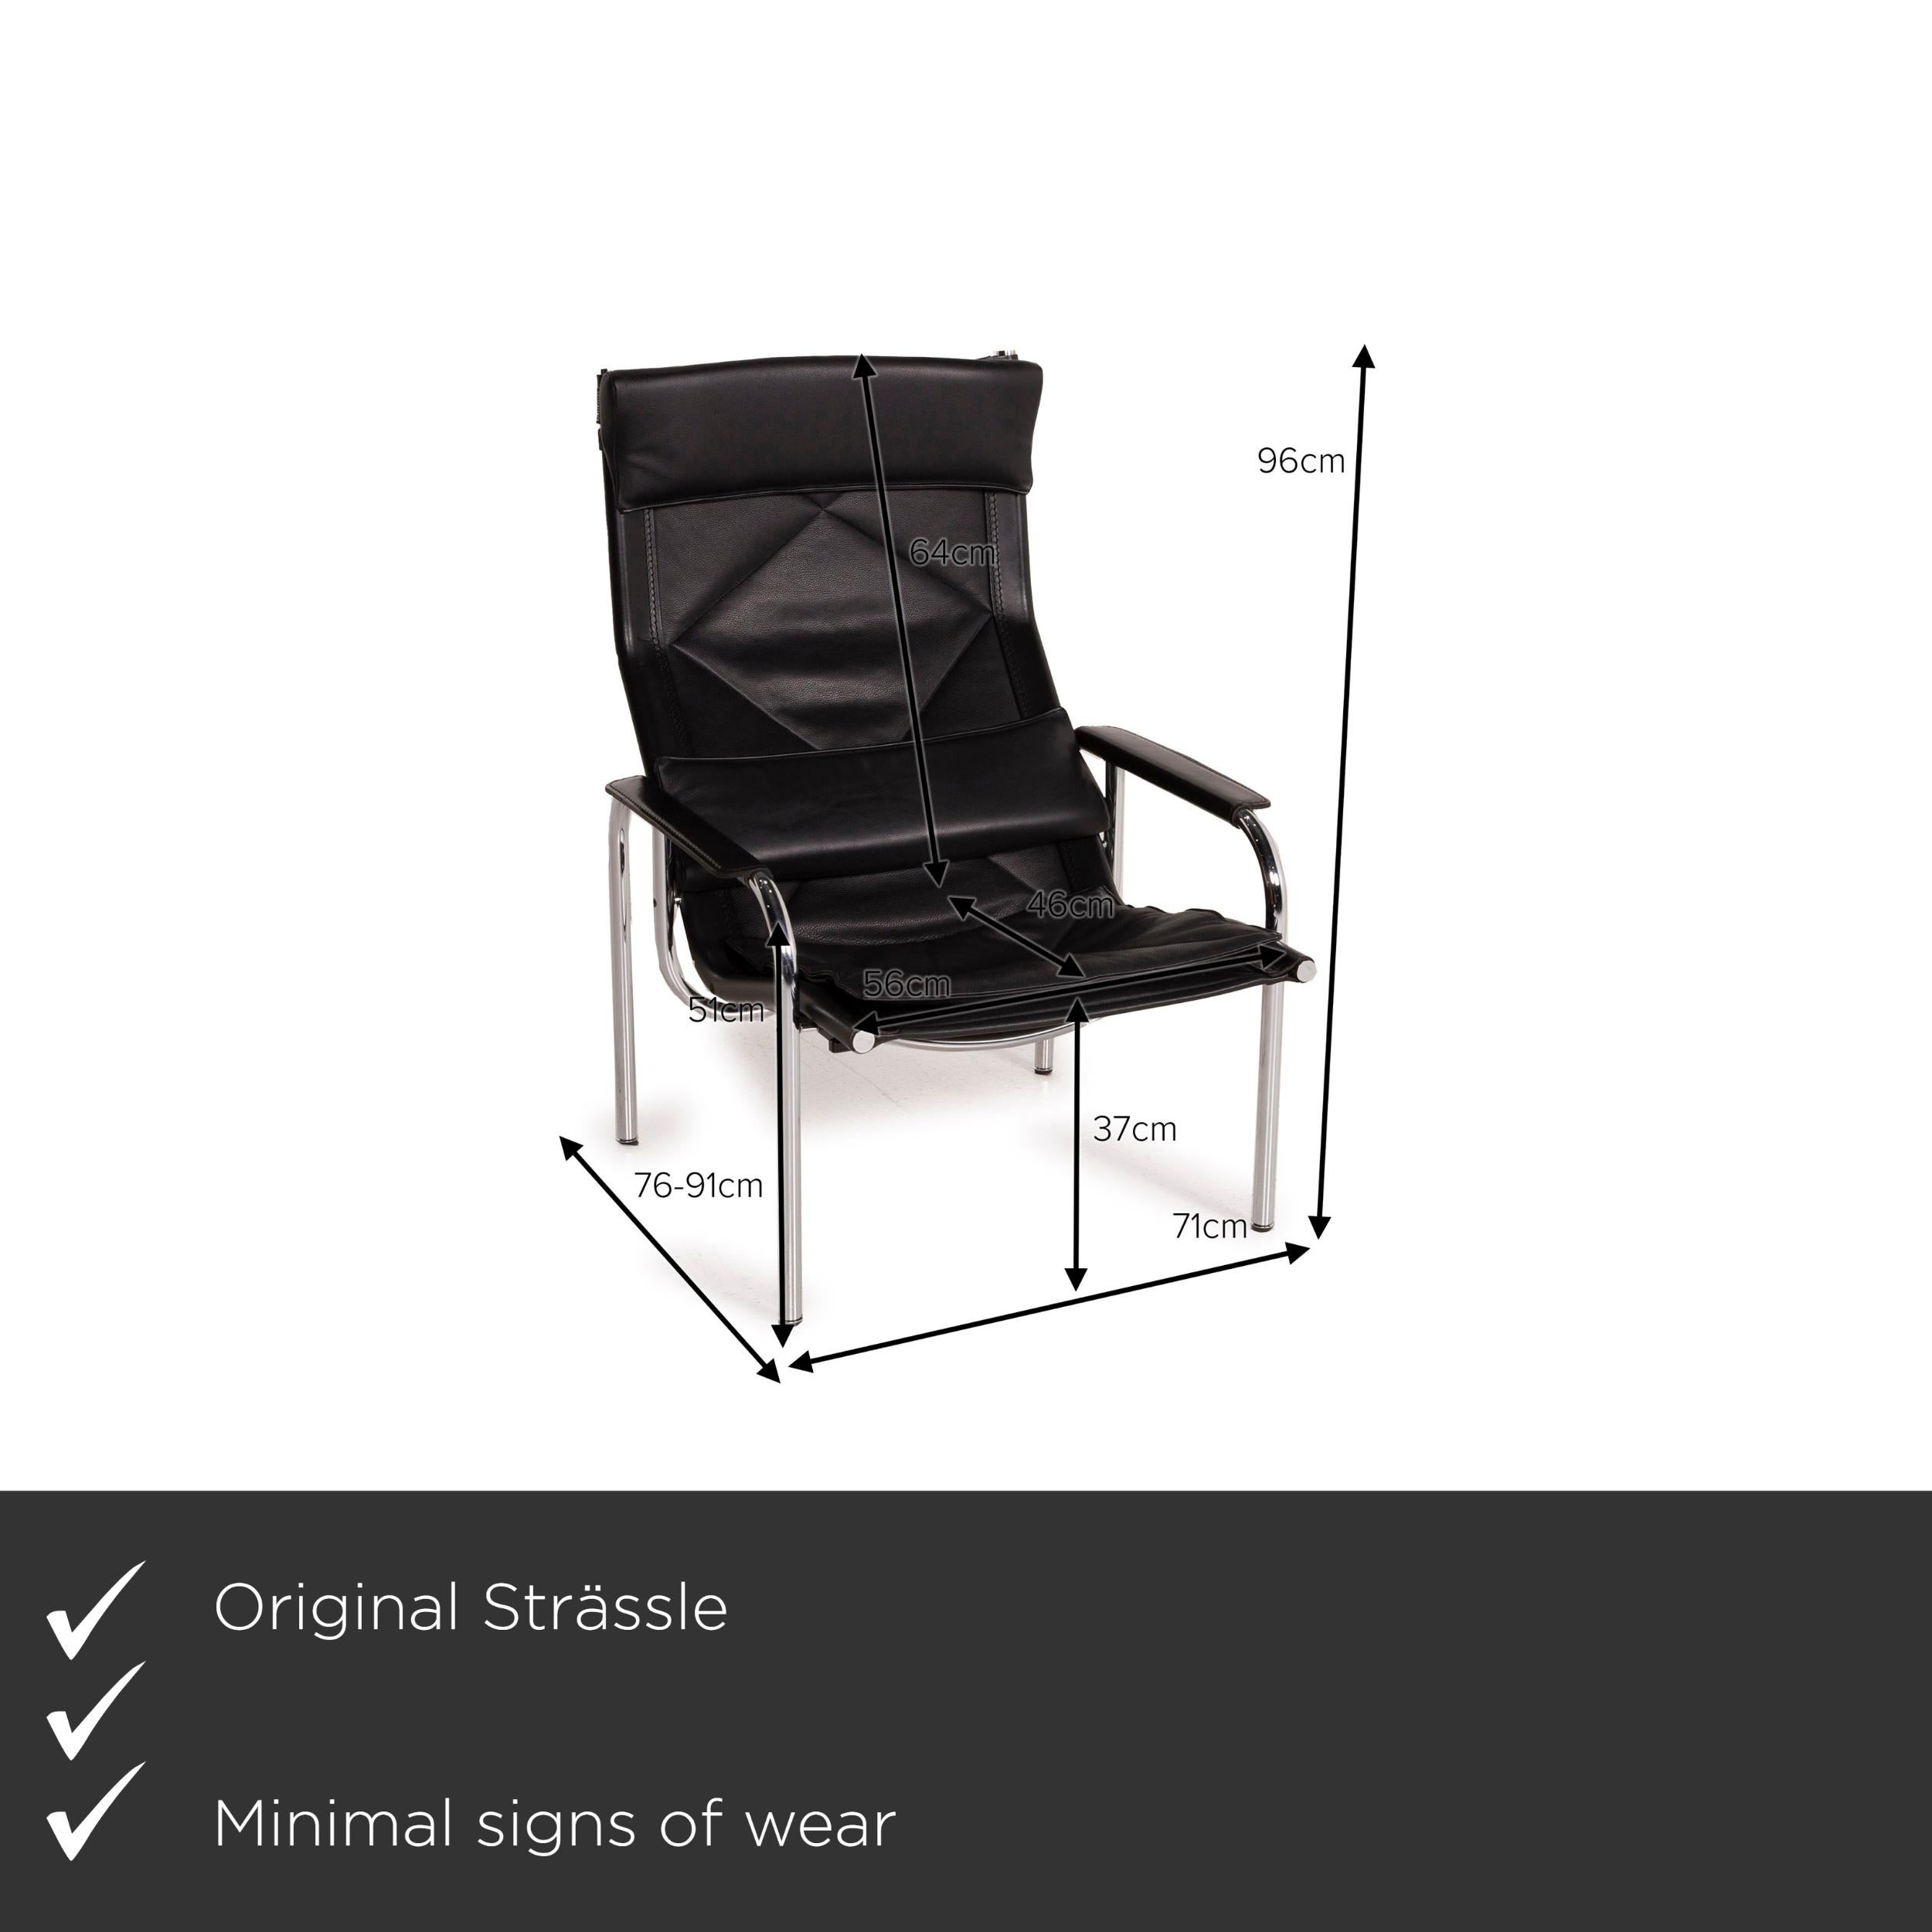 We present to you a Strässle Eichenberger 127-3E-9 by Catellani & Smith leather armchair black.


 Product measurements in centimeters:
 

Depth: 76
Width: 71
Height: 96
Seat height: 37
Rest height: 51
Seat depth: 46
Seat width: 56
Back